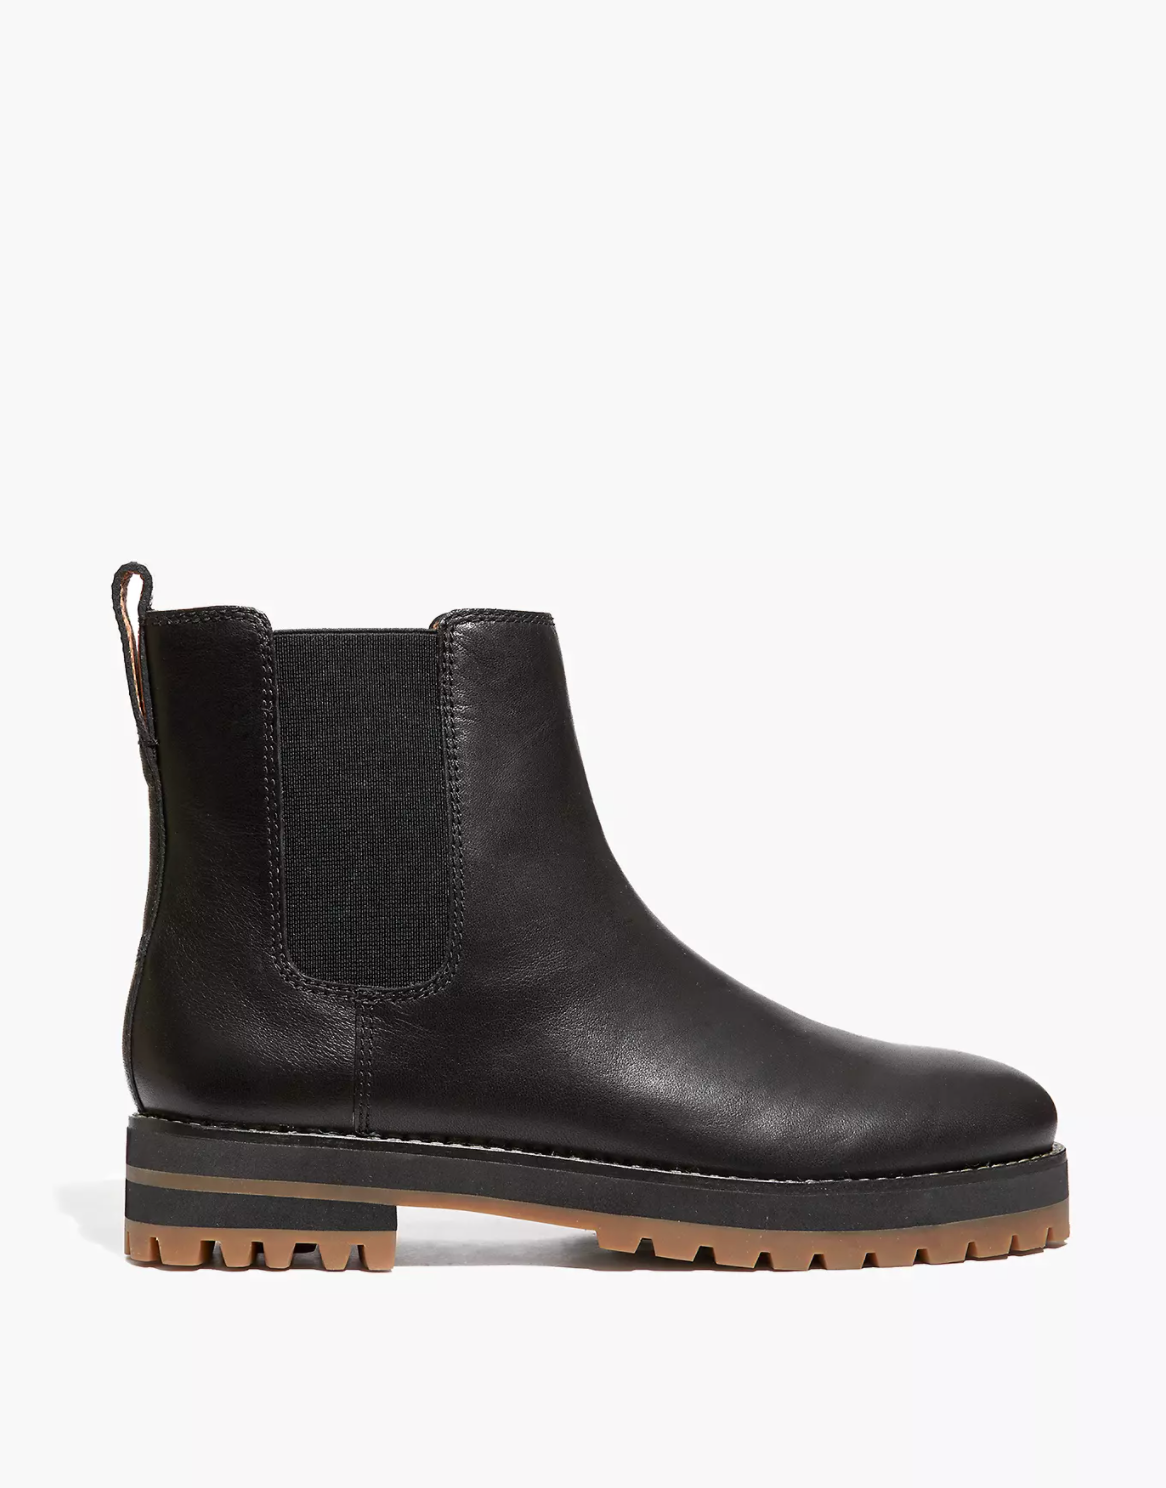 Madewell The Ivy Chelsea Boot in Leather